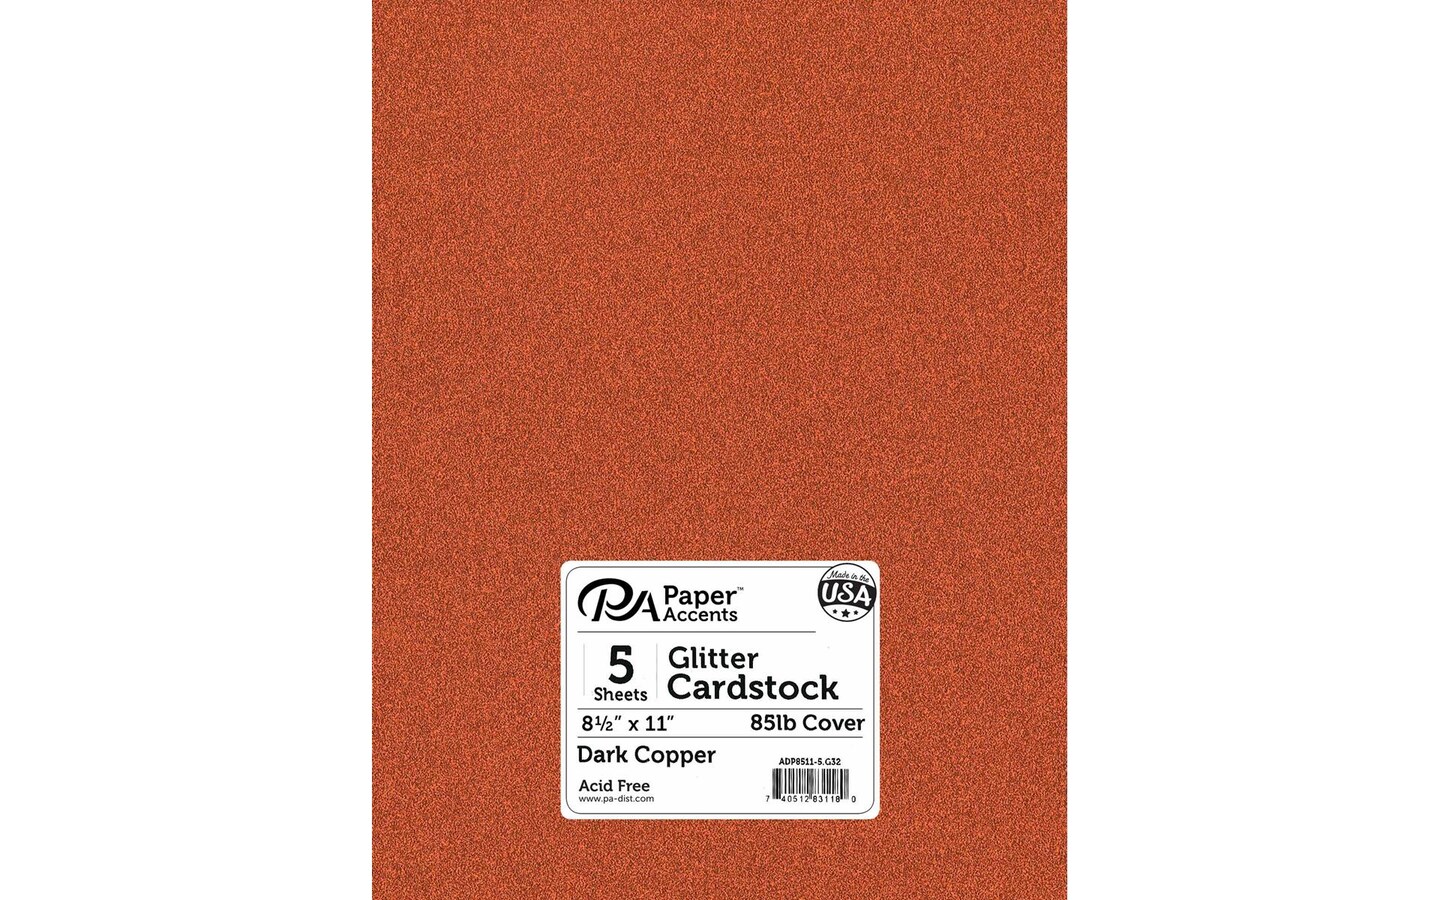 Glitter Cardstock Paper Assorted Colors for Craft Project (11 Sheets)